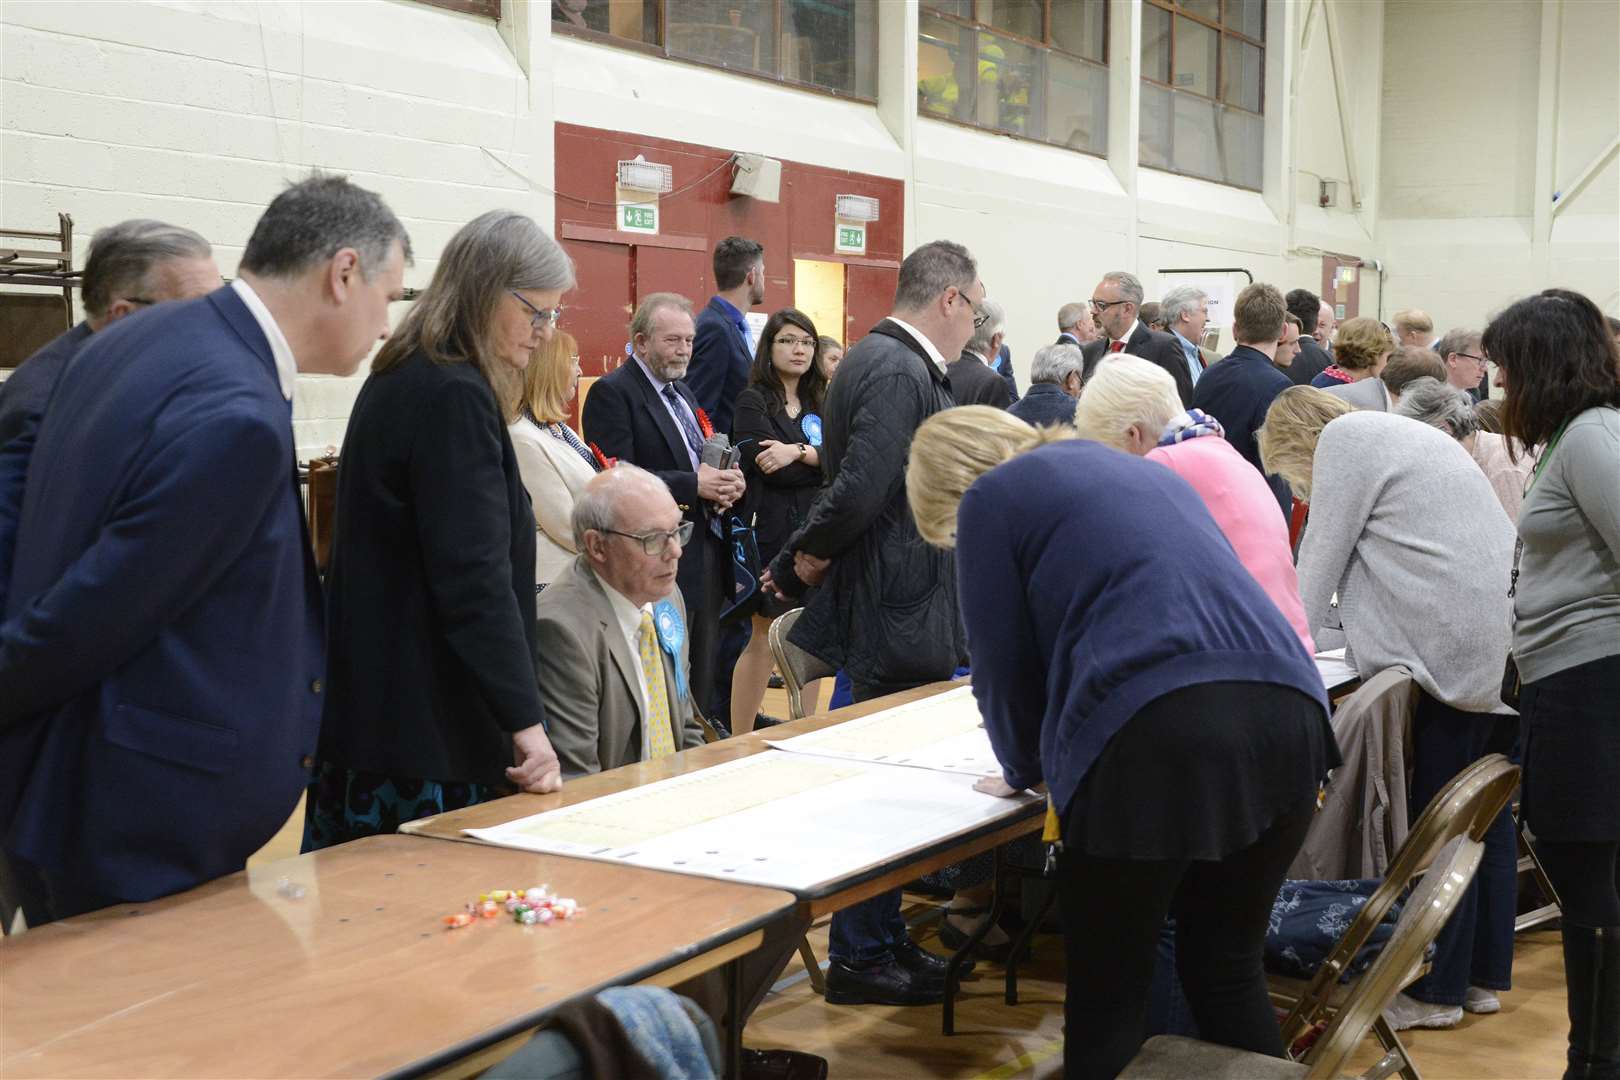 Graham Galpin looks on as the Furley vote is counted. Picture: Paul Amos